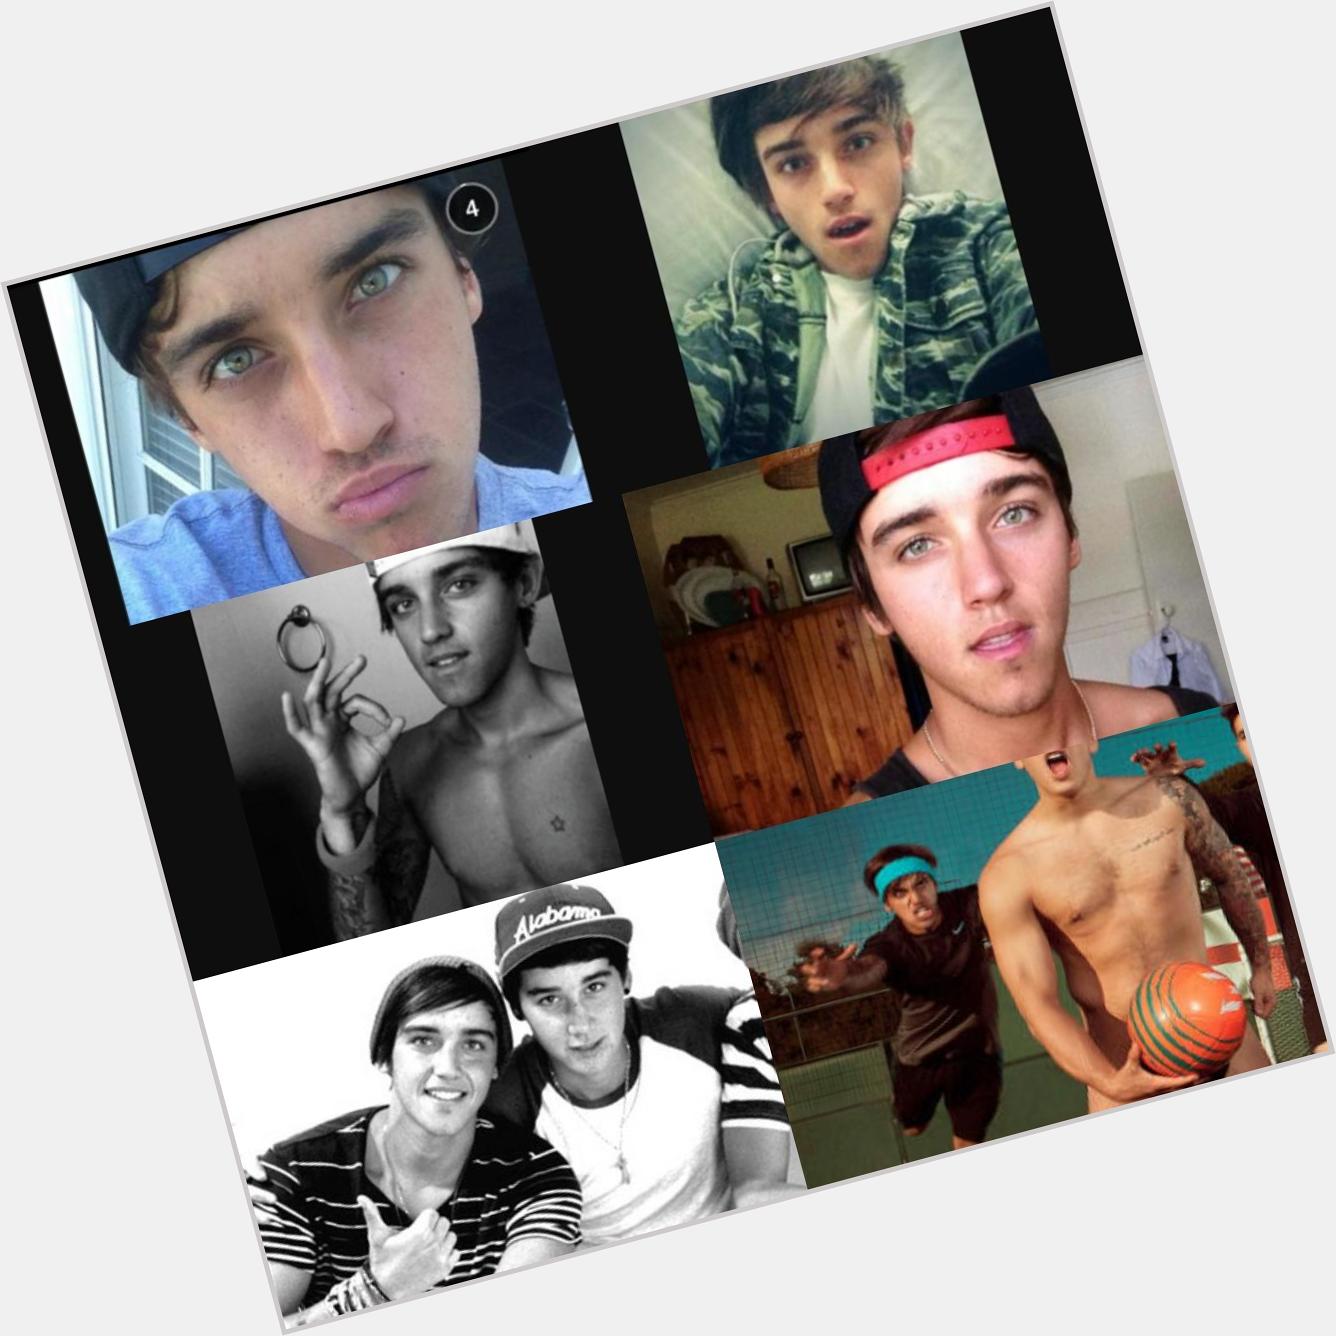 Happy 22nd birthday to the gorgeous beau brooks, booking my ticket today to see you soon                 